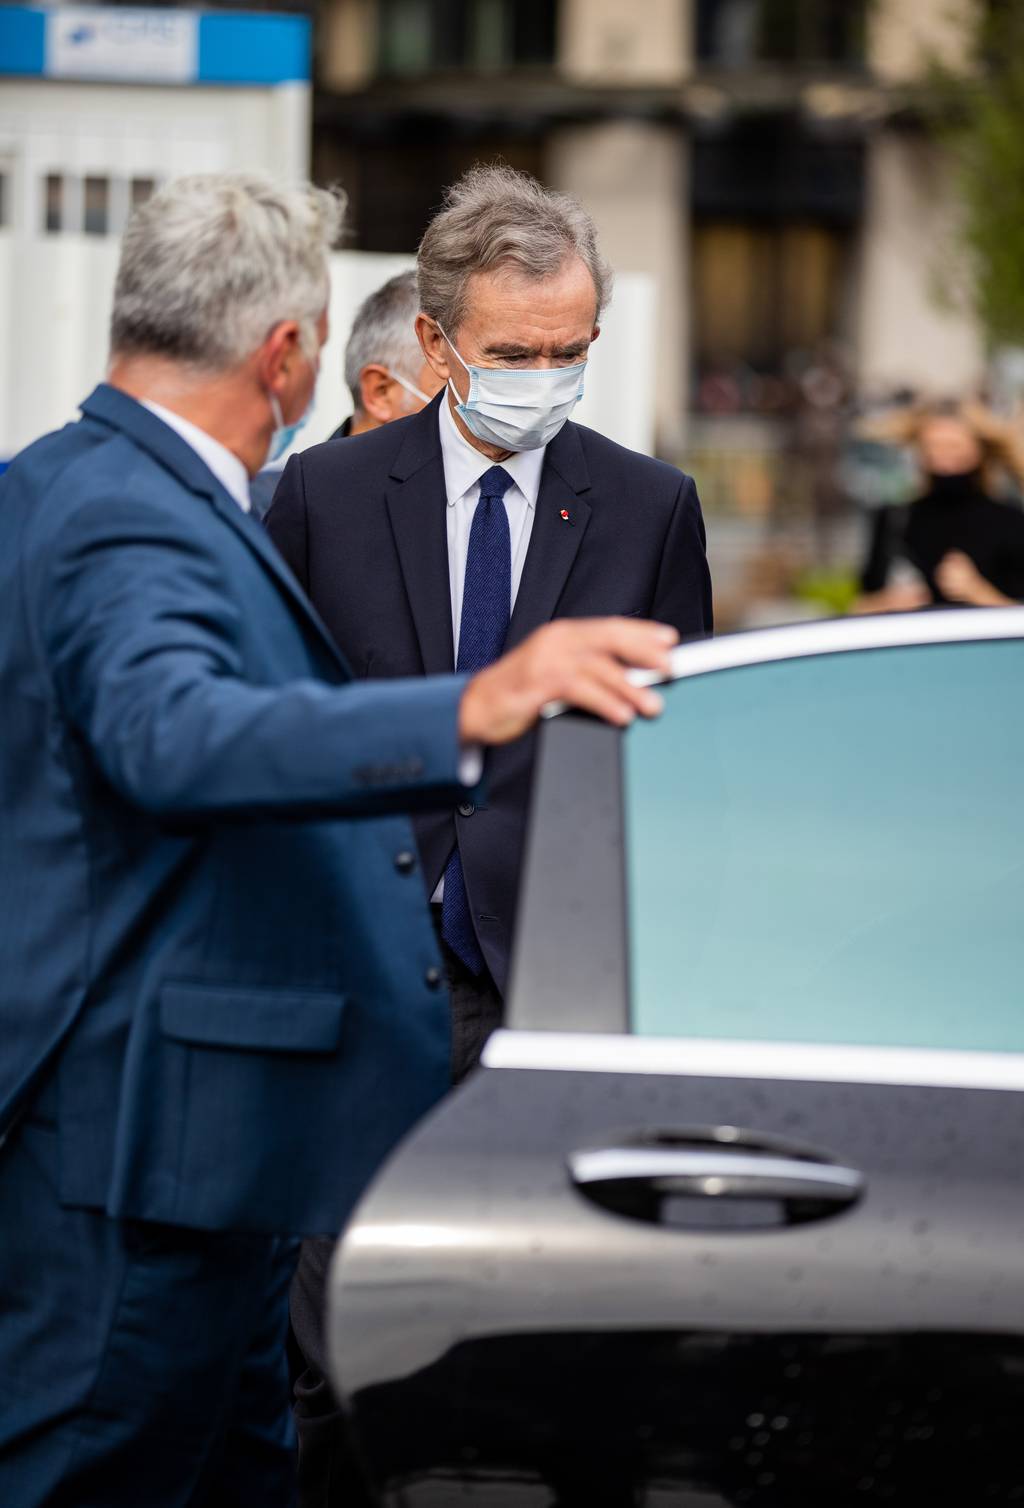 PARIS, FRANCE - OCTOBER 06: Bernard Arnault is seen outside Louis Vuitton during Paris Fashion Week - Womenswear Spring Summer 2021 : Day Nine on October 06, 2020 in Paris, France. (Photo by Christian Vierig/Getty Images)